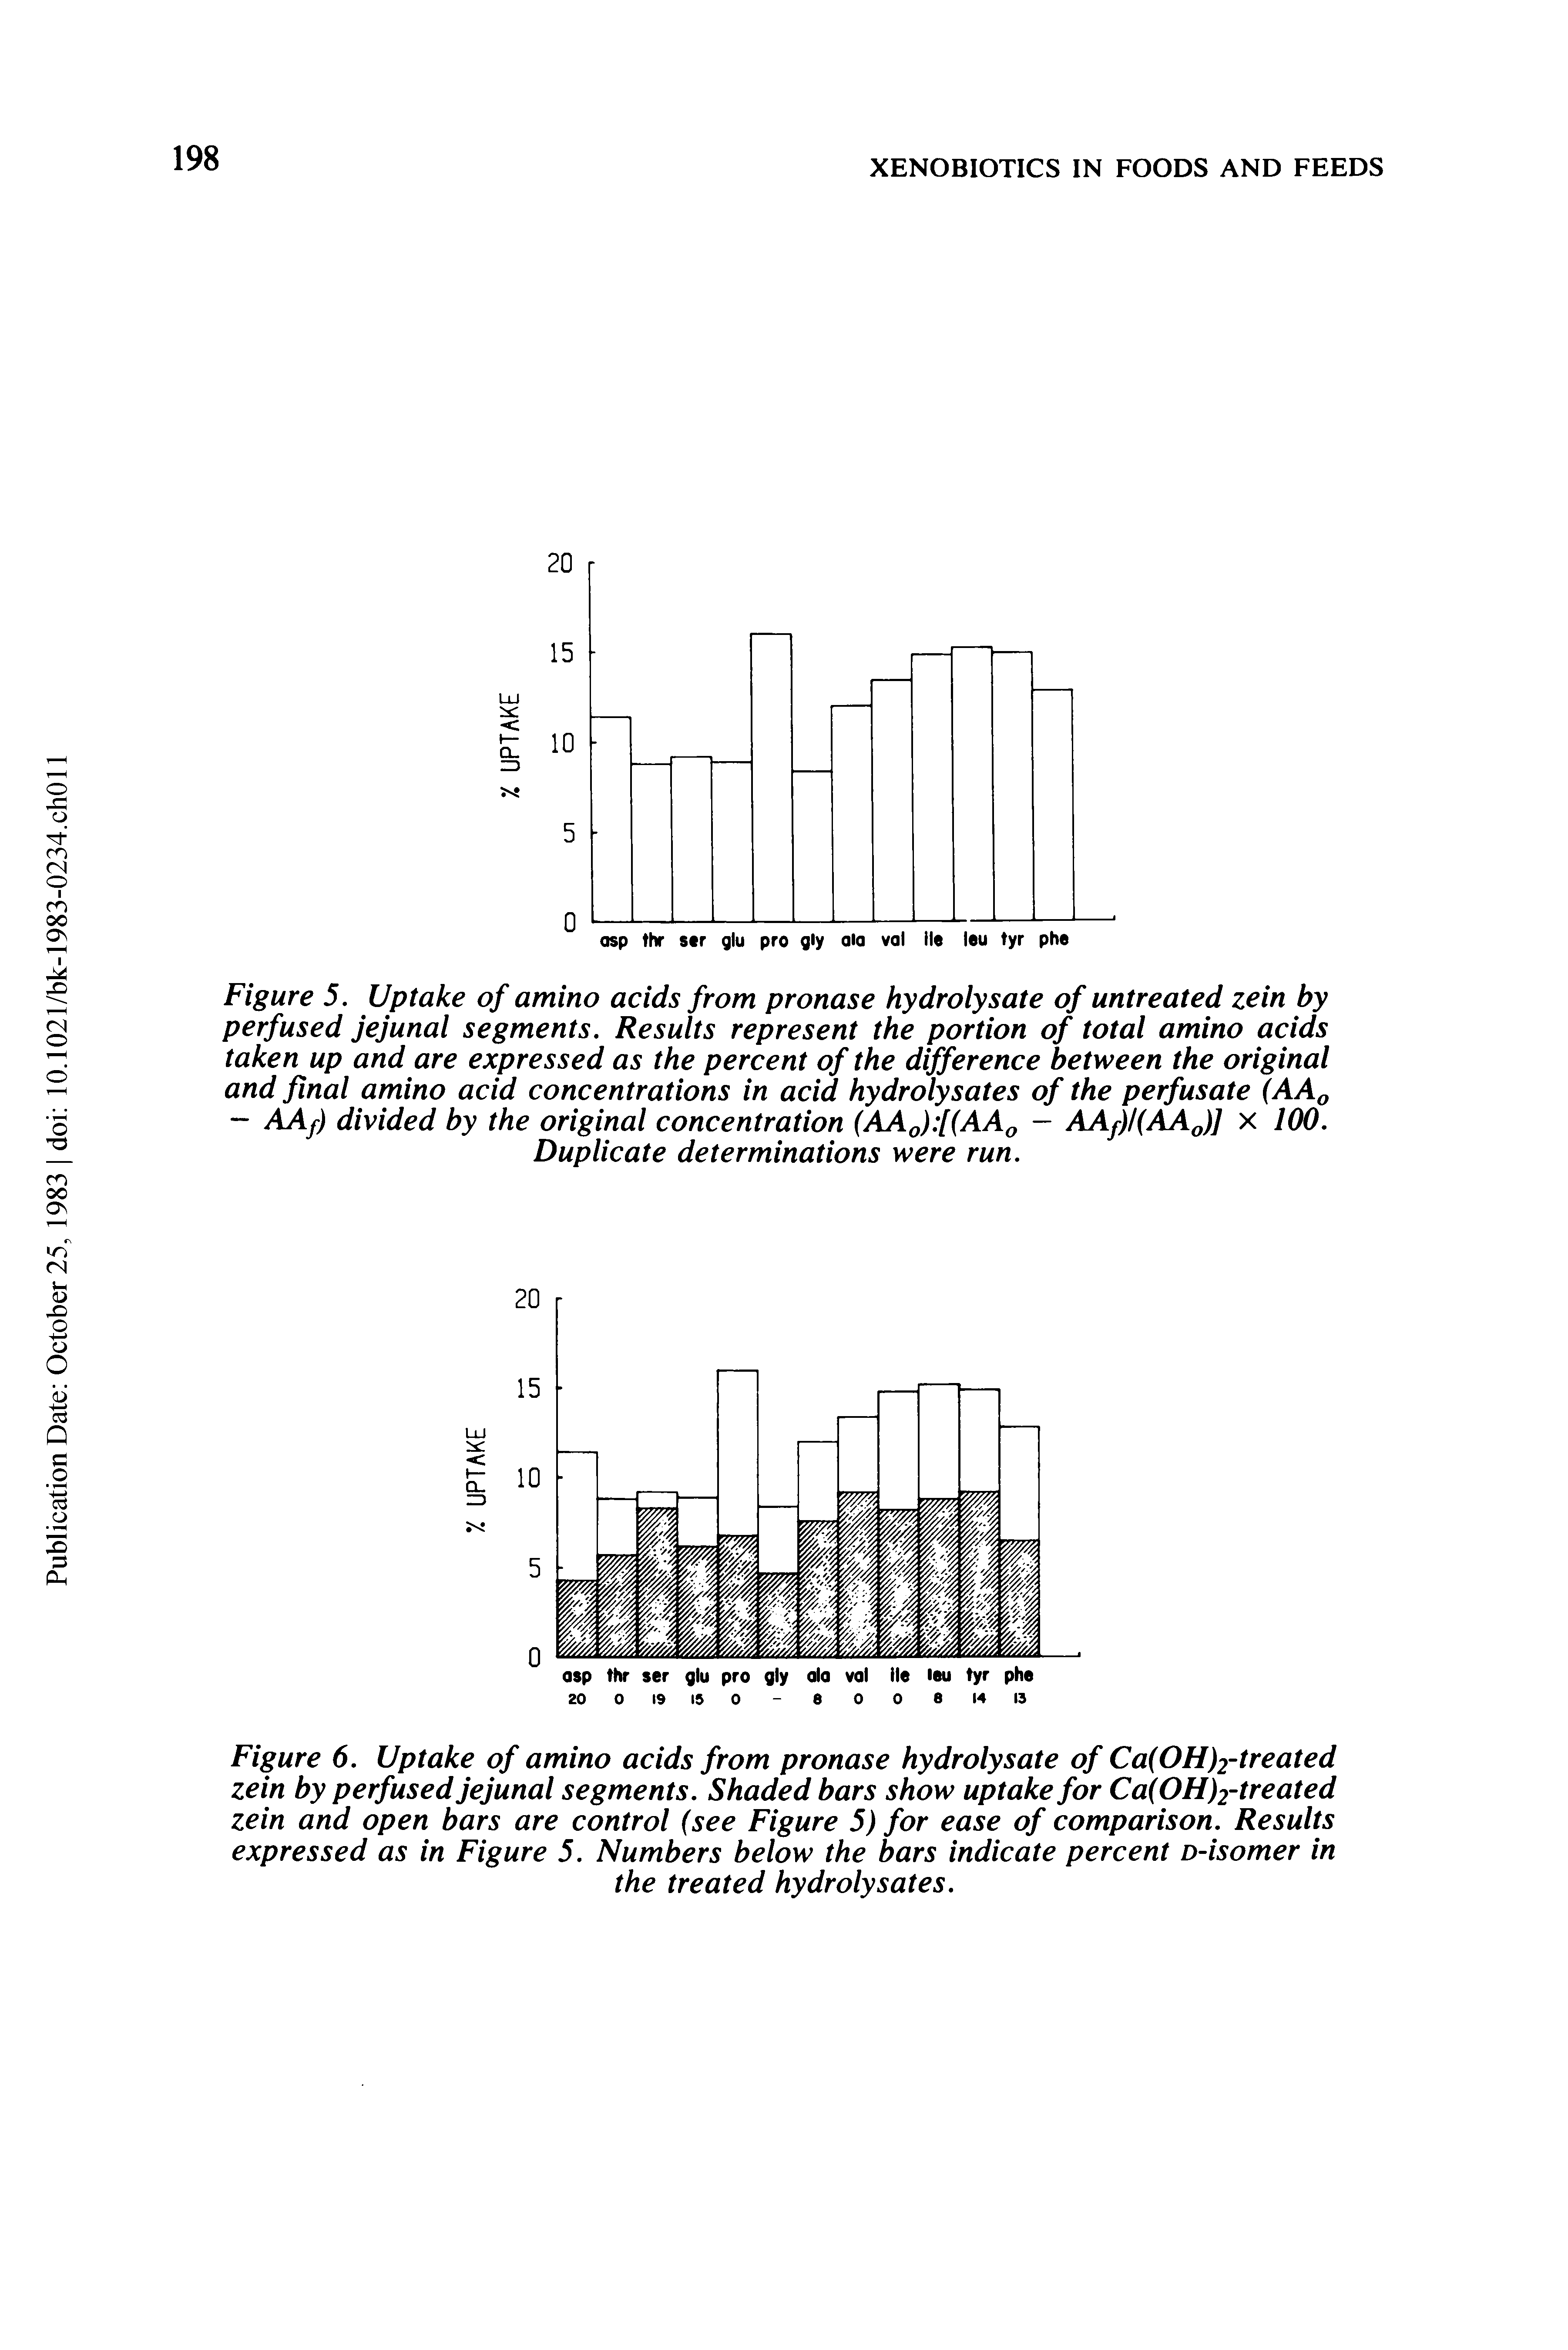 Figure 5. Uptake of amino acids from pronase hydrolysate of untreated zein by perfused jejunal segments. Results represent the portion of total amino acids taken up and are expressed as the percent of the difference between the original and final amino acid concentrations in acid hydrolysates of the perfusate (AA - AAf) divided by the original concentration - AAf)l(AAJ] x 100.